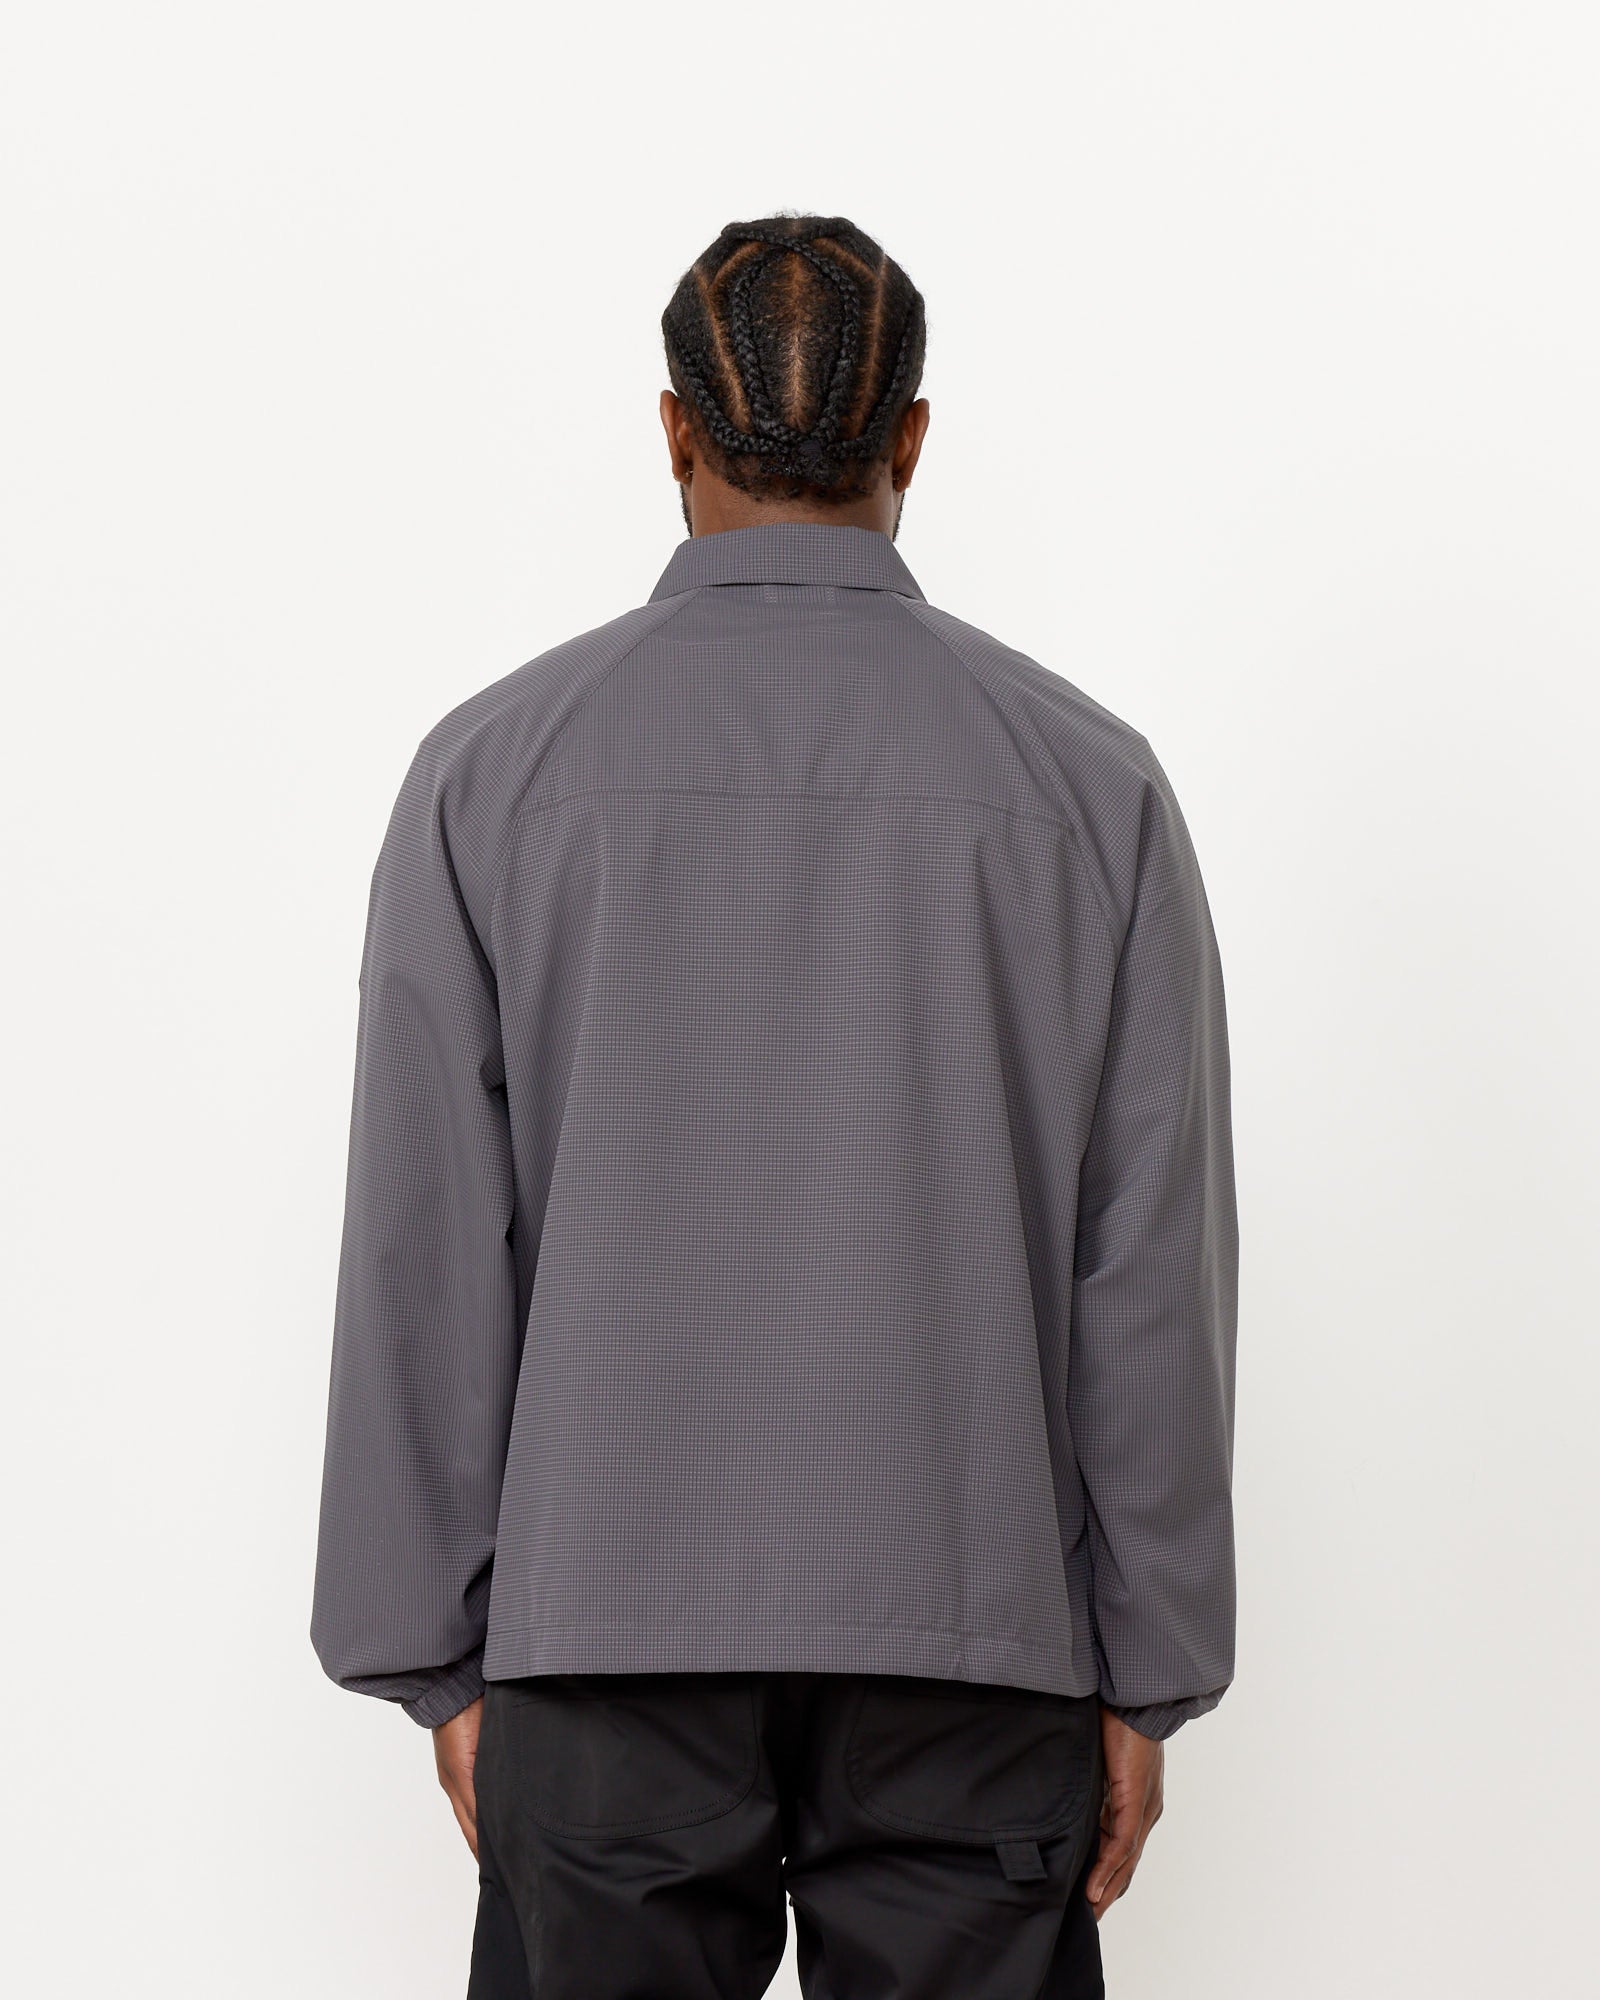 Perforated Shirt in Graphite